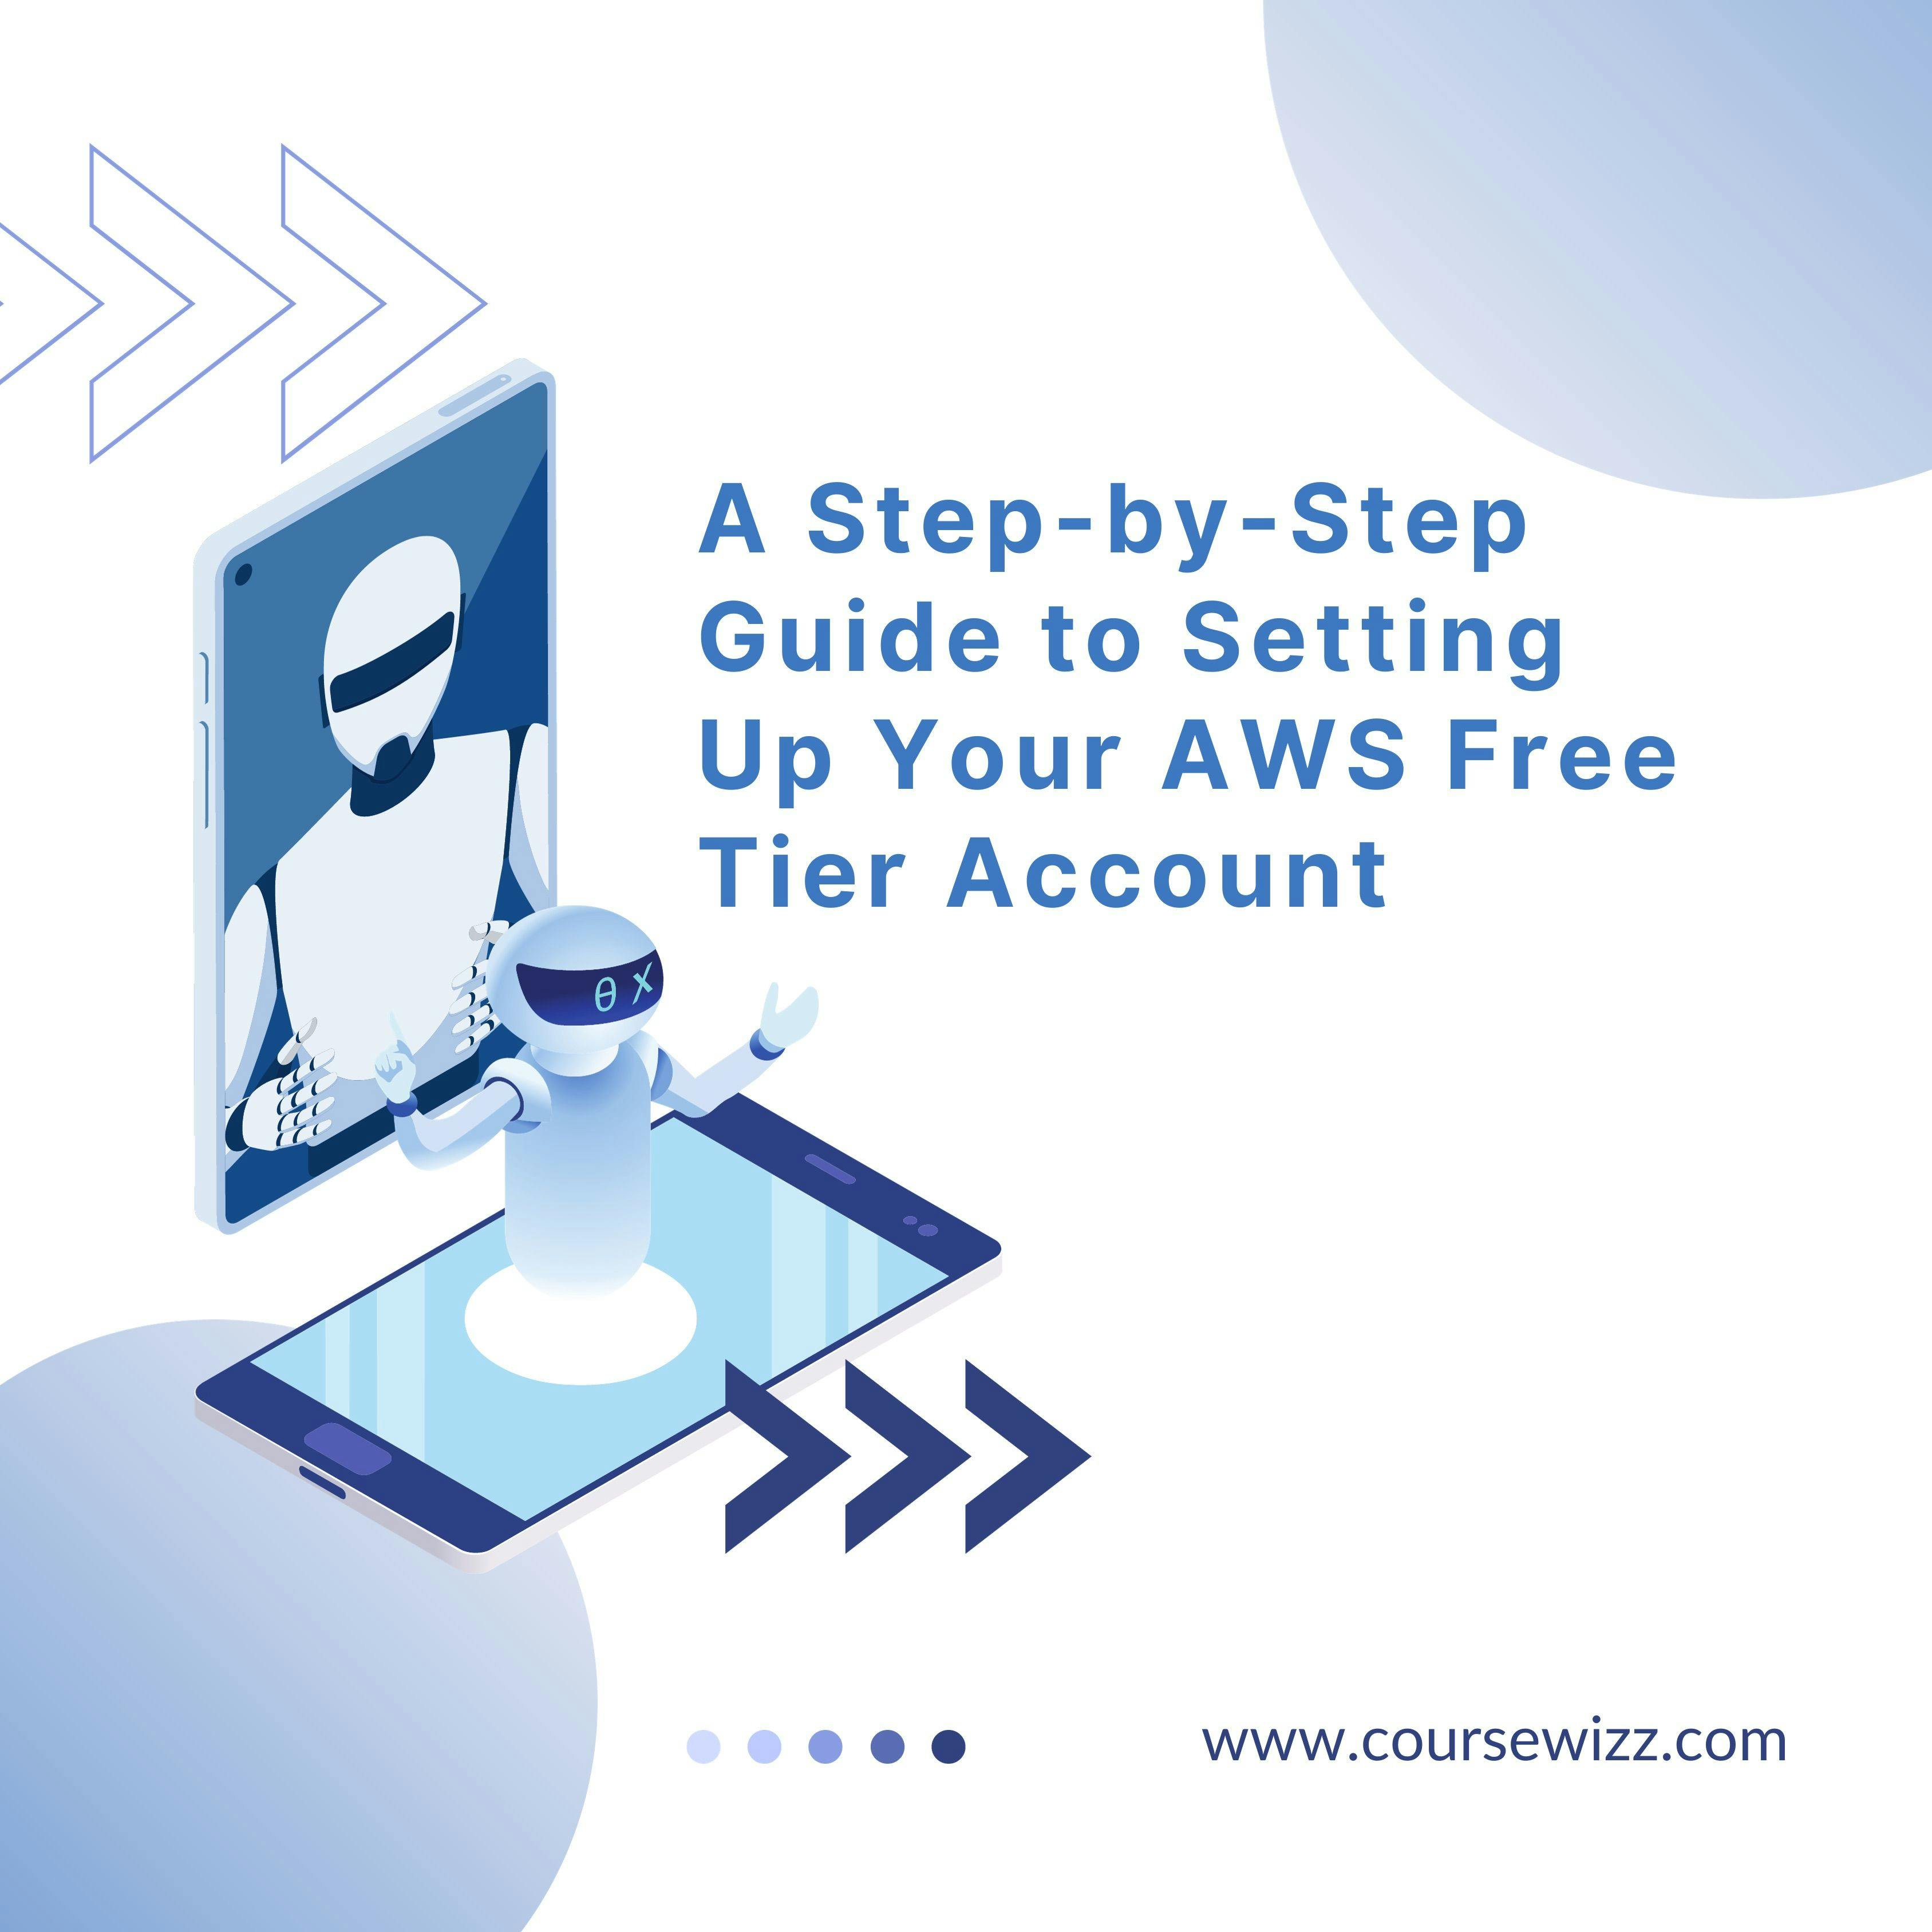 A Step By Step Guide to Setting Up Your AWS Free Tier Account